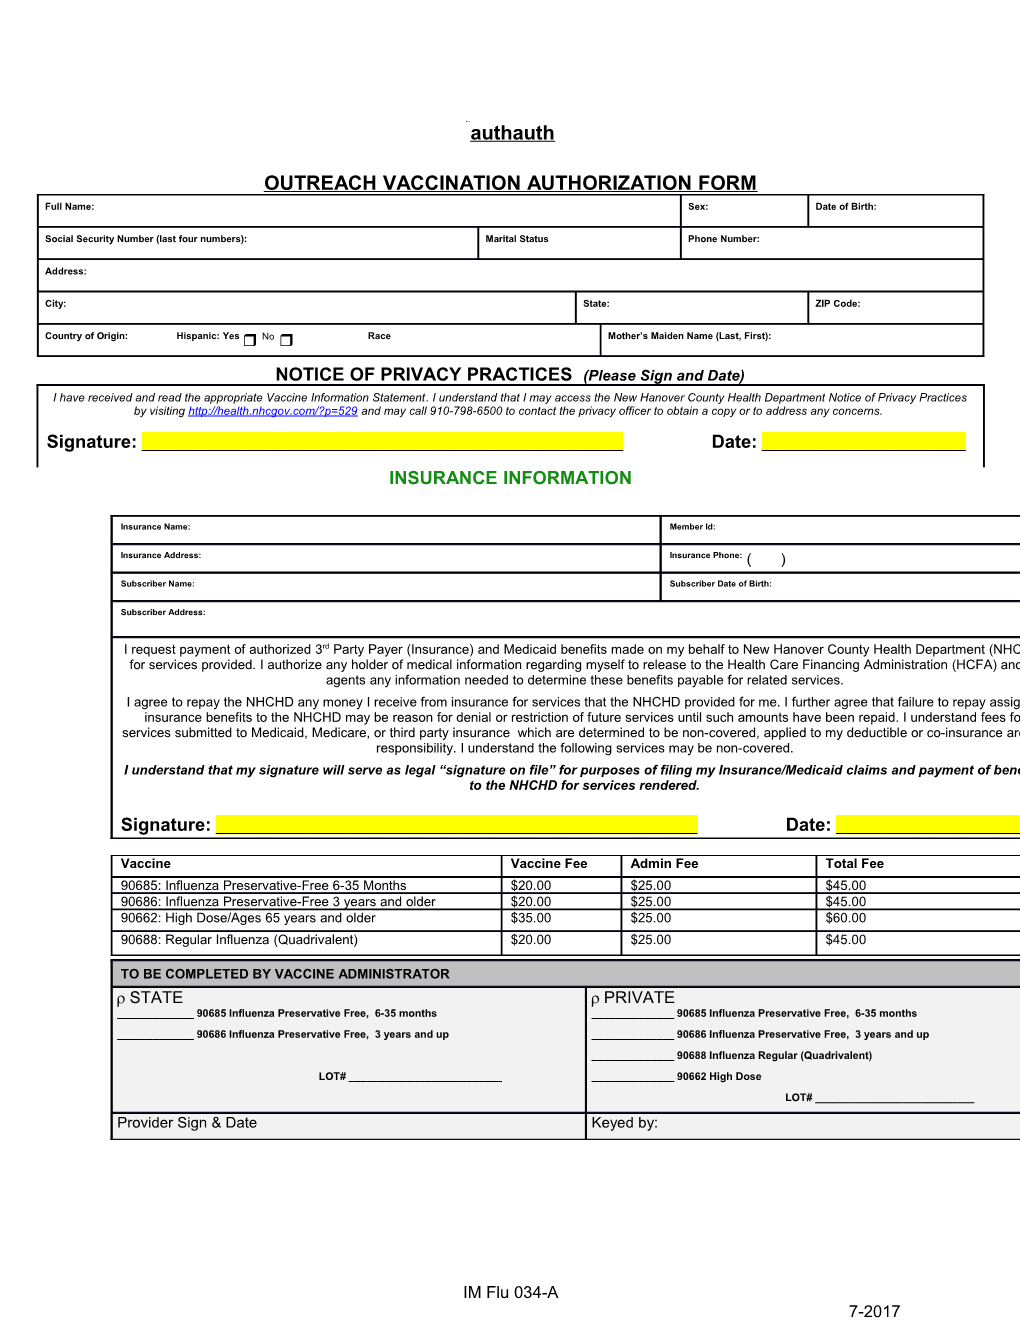 Outreach Vaccination Authorization Form